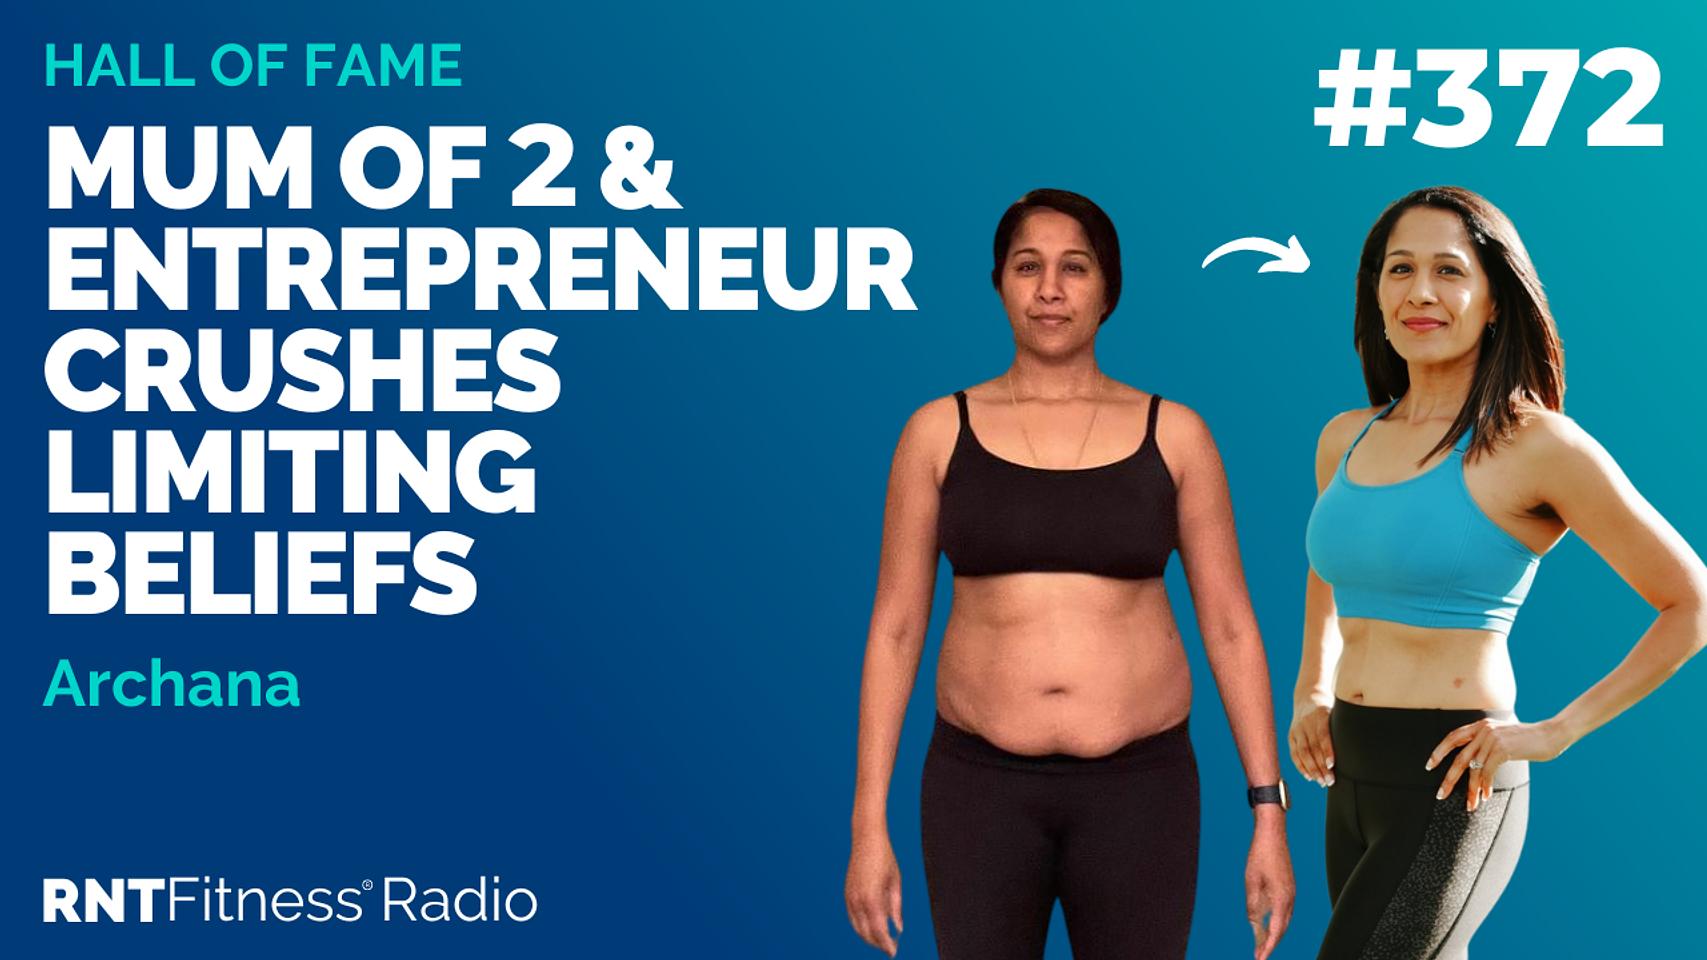 Ep 372 Hall Of Fame | Archana: Mum Of 2 & Entrepreneur Crushes Limiting Beliefs